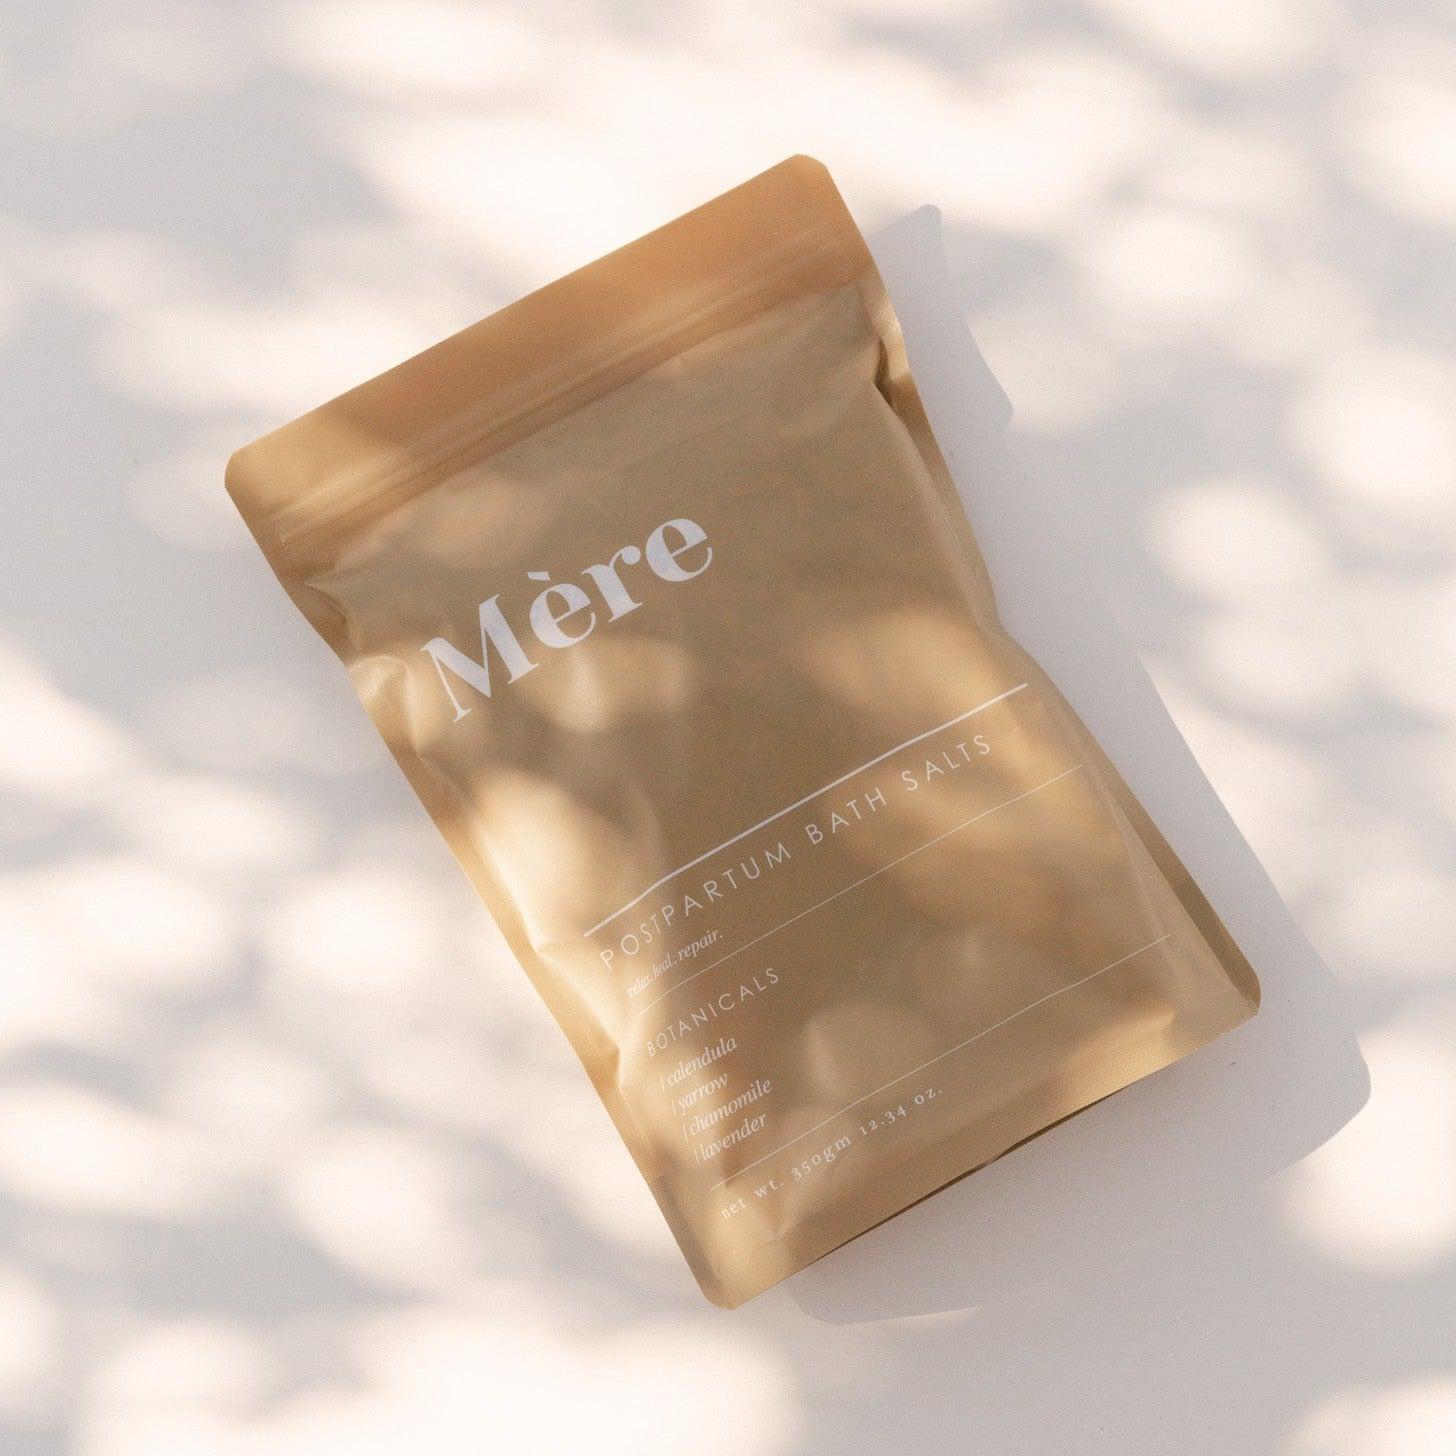 A calming bag with the word 'more' on it, called Postpartum Bath Salts by Mère.